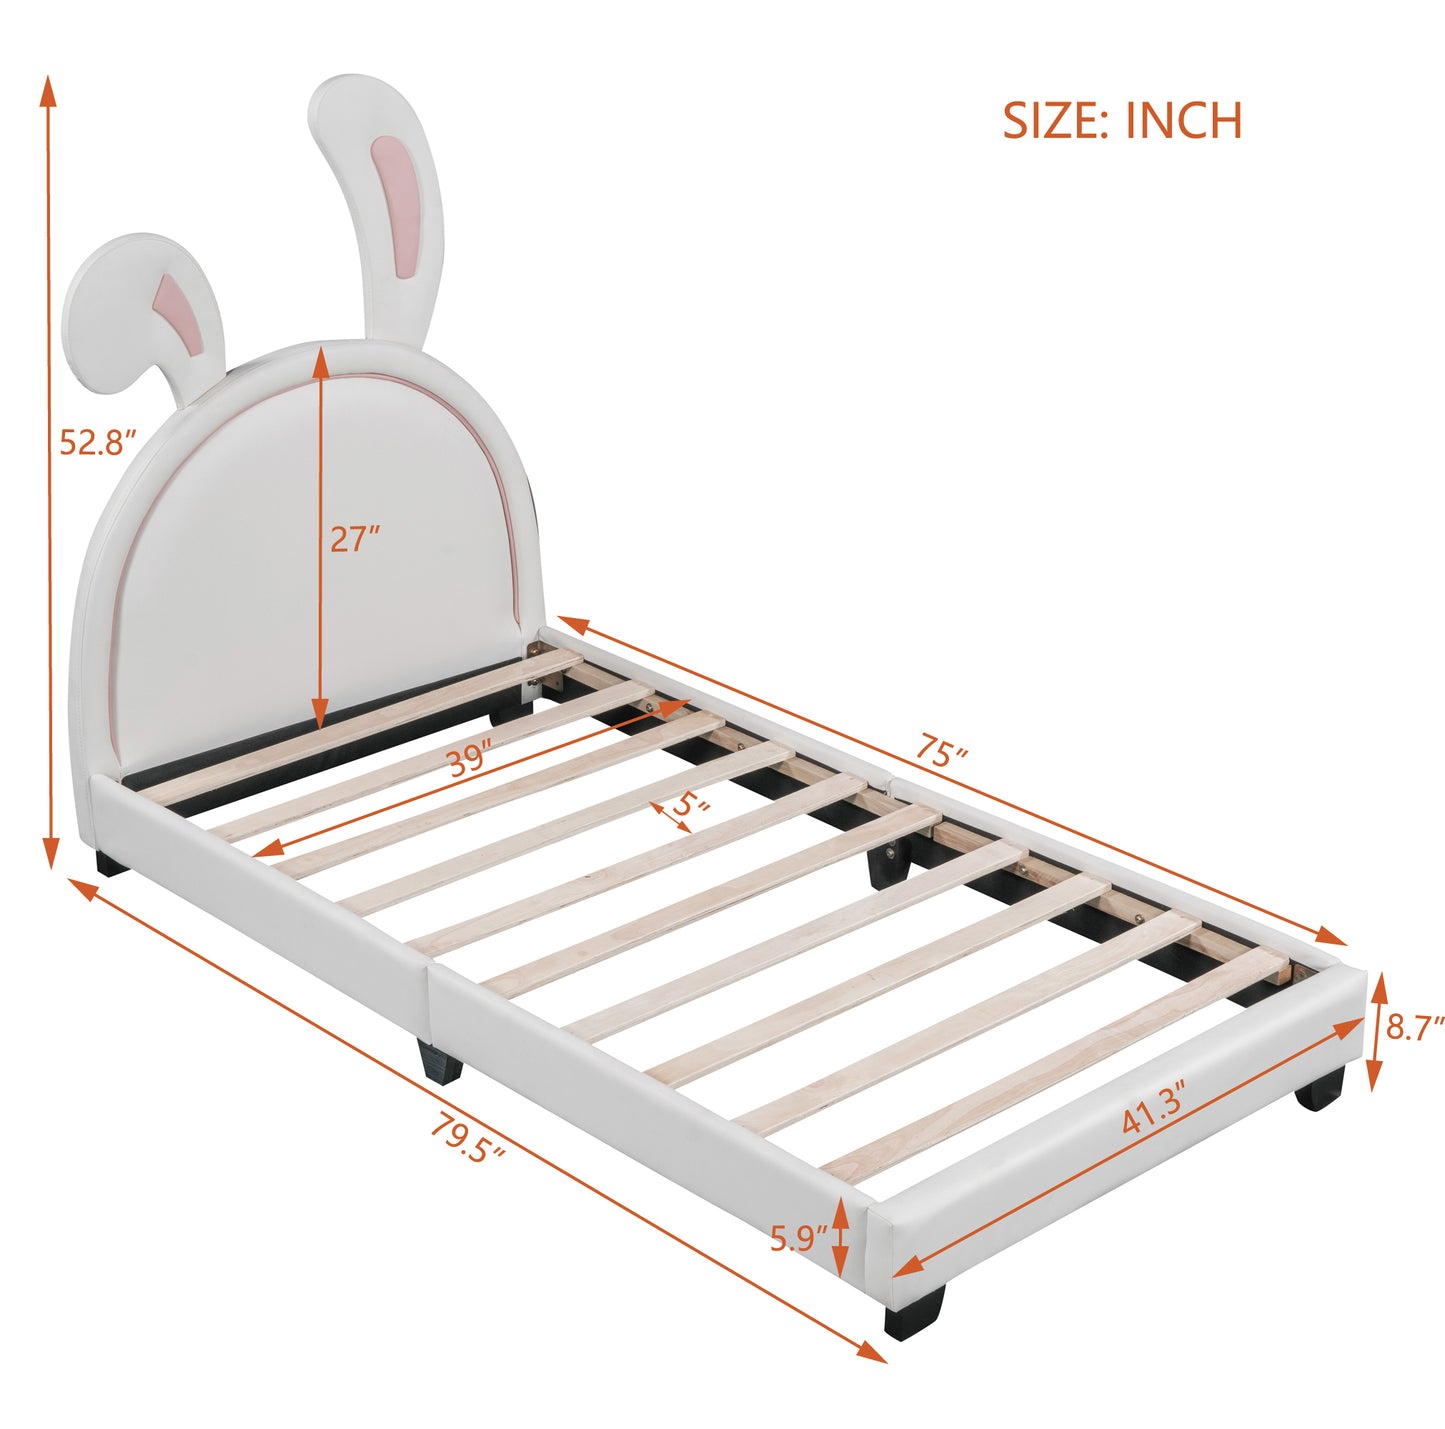 Twin Size Upholstered Leather Platform Bed with Rabbit Ornament, White